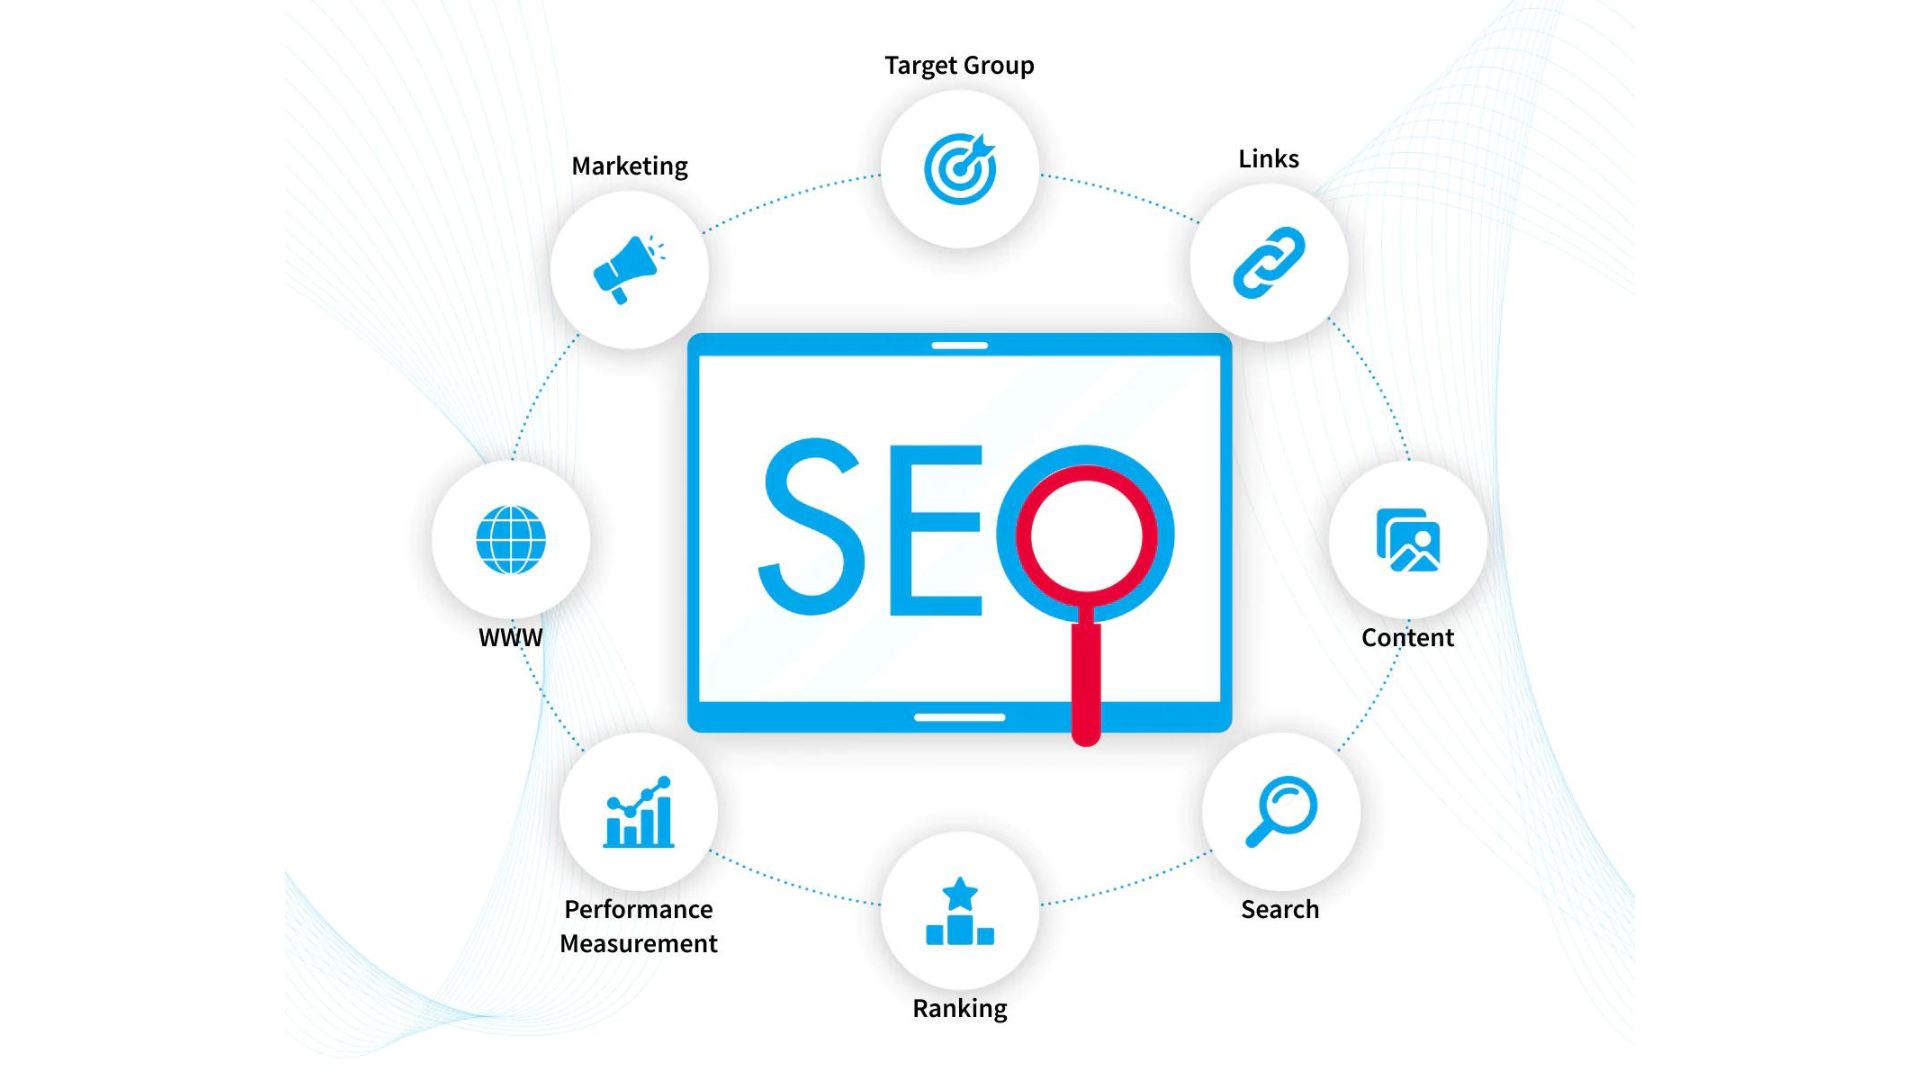 What Function Does SEO Serve In Marketing?